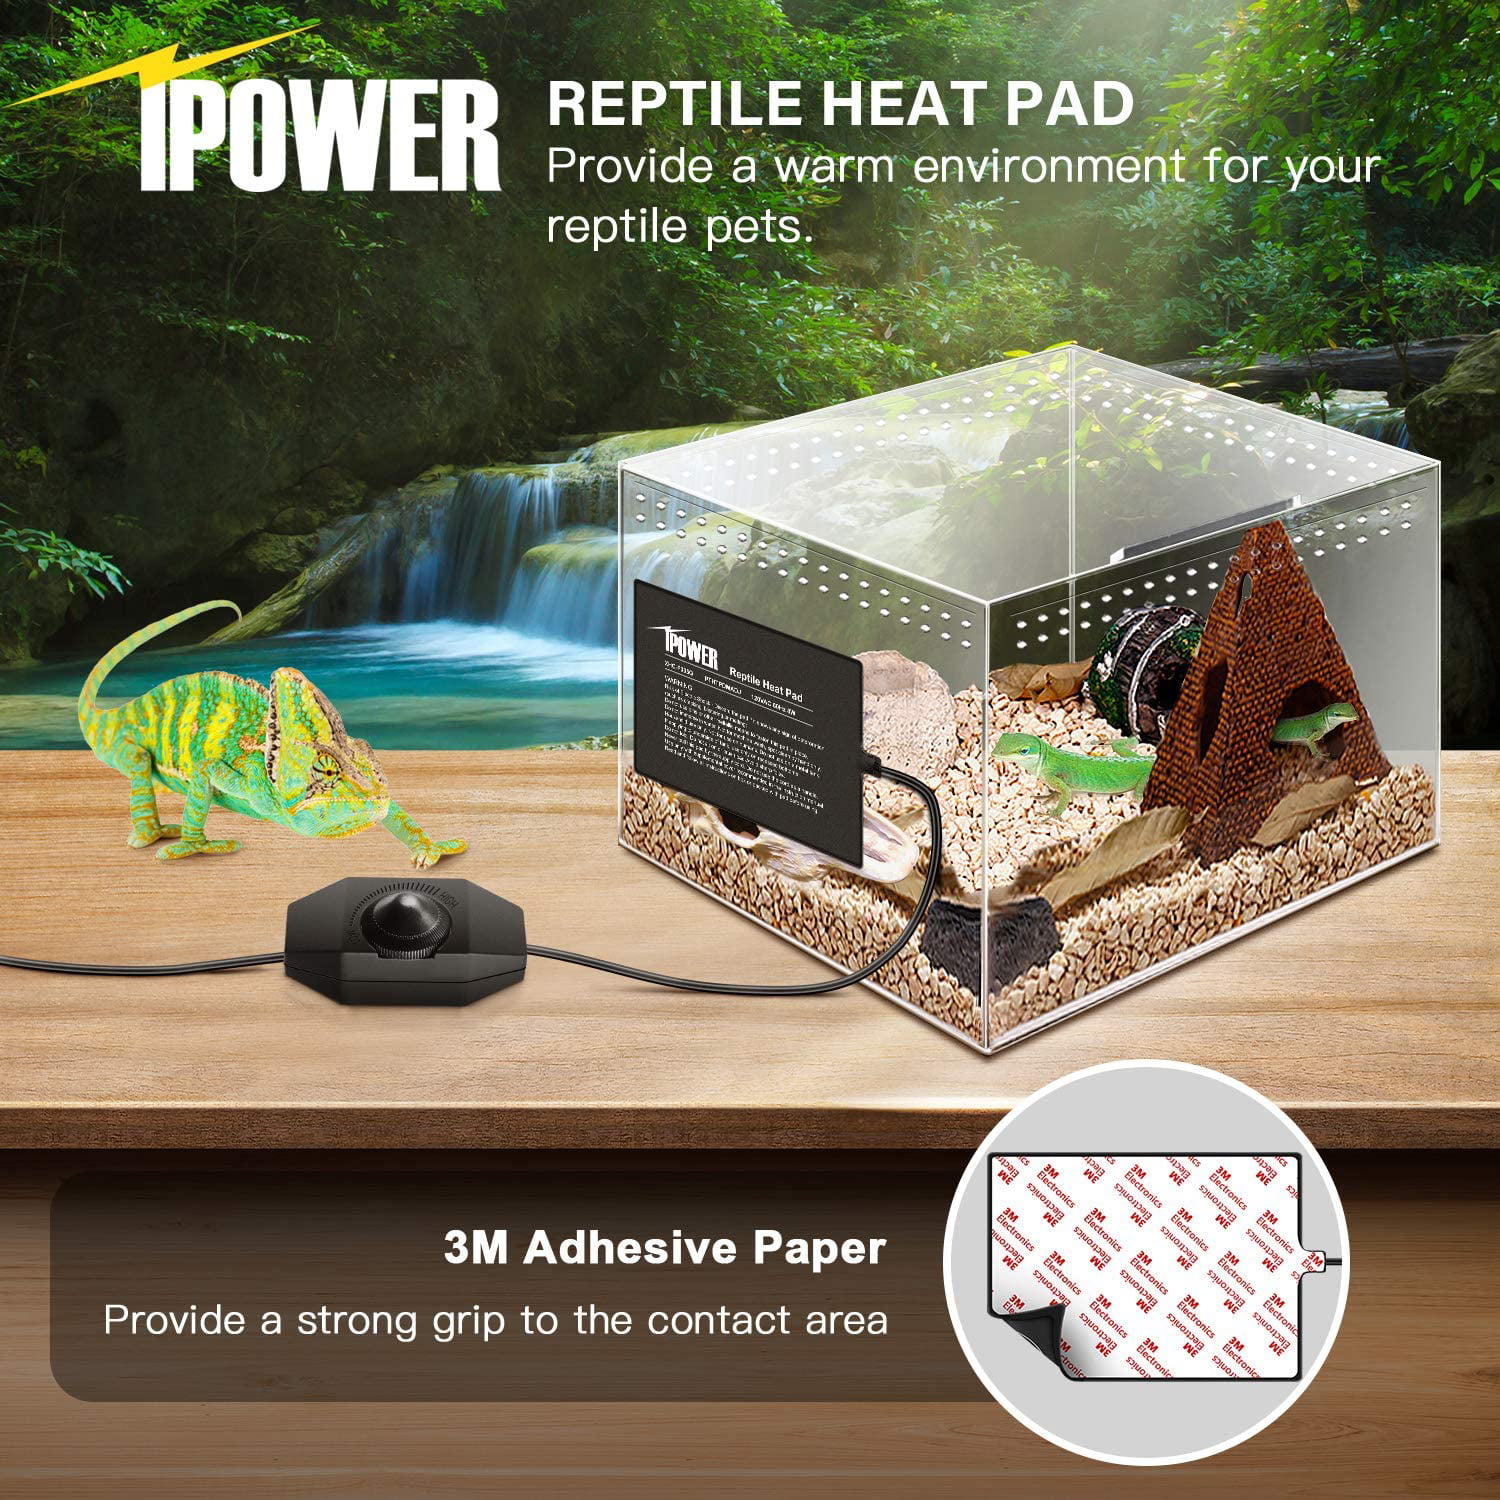 iPower Reptile Heat Pad 4W/8W/16W/24W Under Tank Terrarium Warmer Heating  Mat and Digital Thermostat Controller for Turtles Lizards Frogs and Other